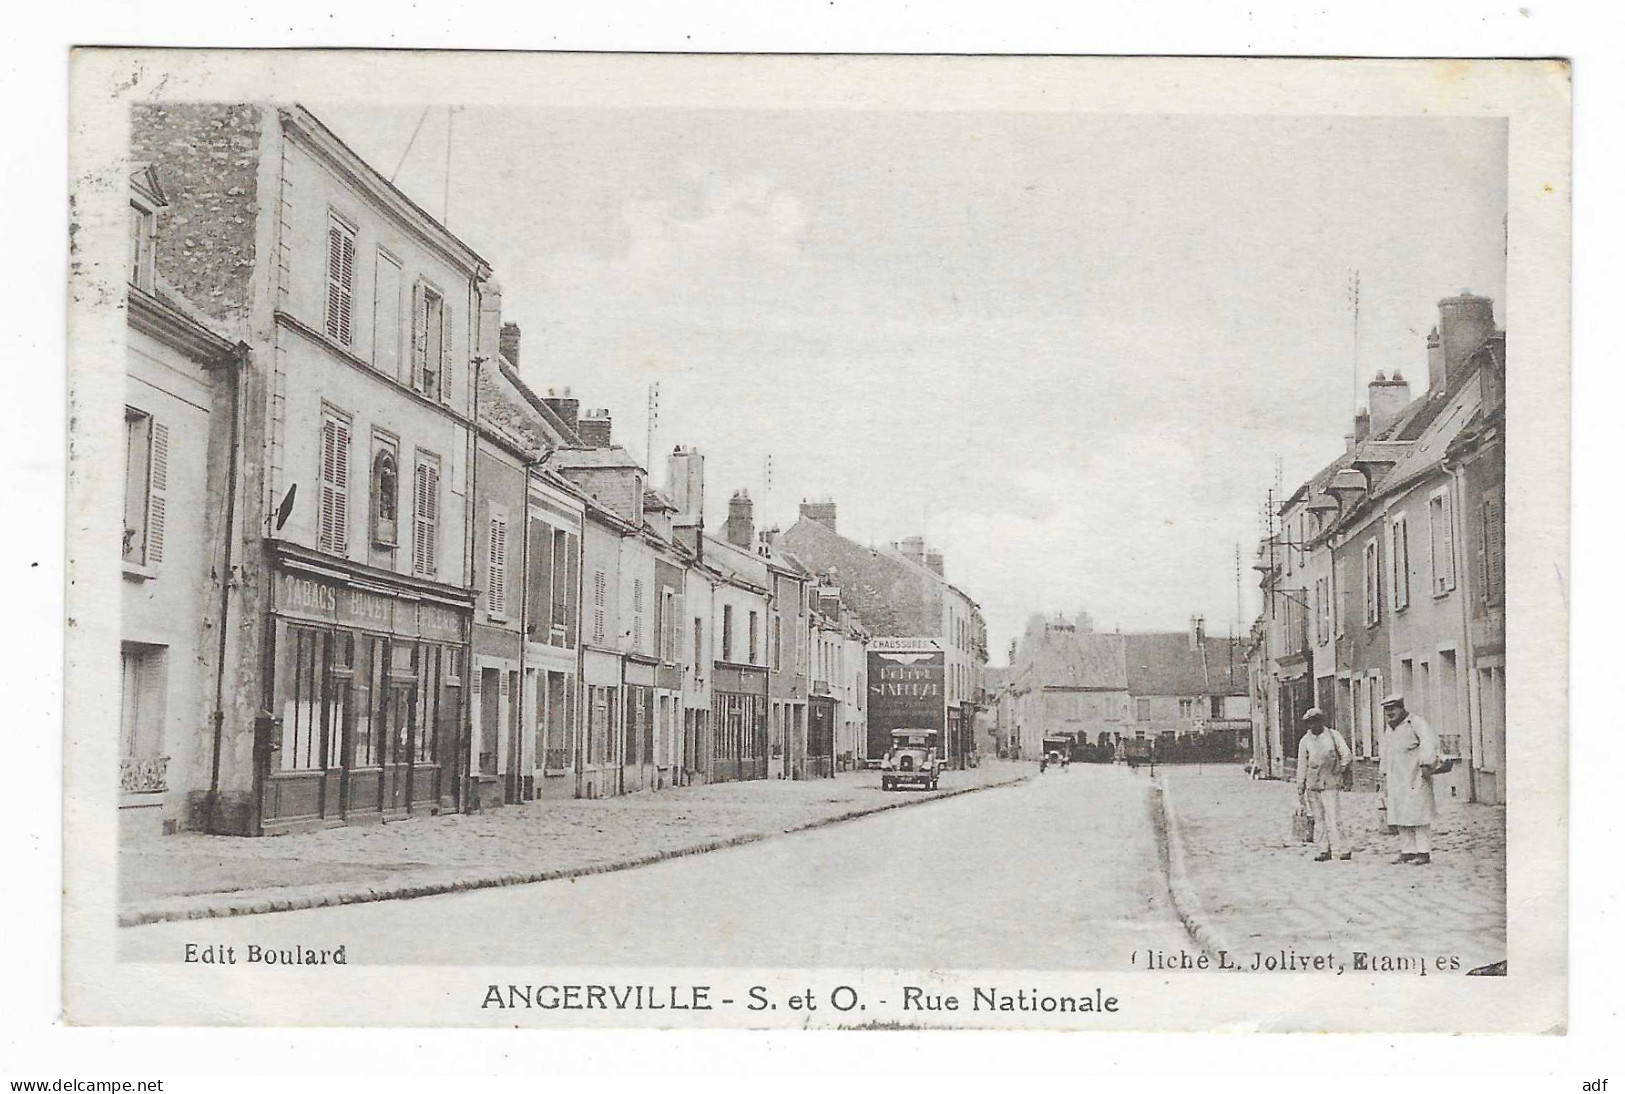 CPA ANGERVILLE, PETITE ANIMATION, RUE NATIONALE, AUTO VOITURE TACOT, TABAC BUVETTE EPICERIE, ESSONNE 91 - Angerville